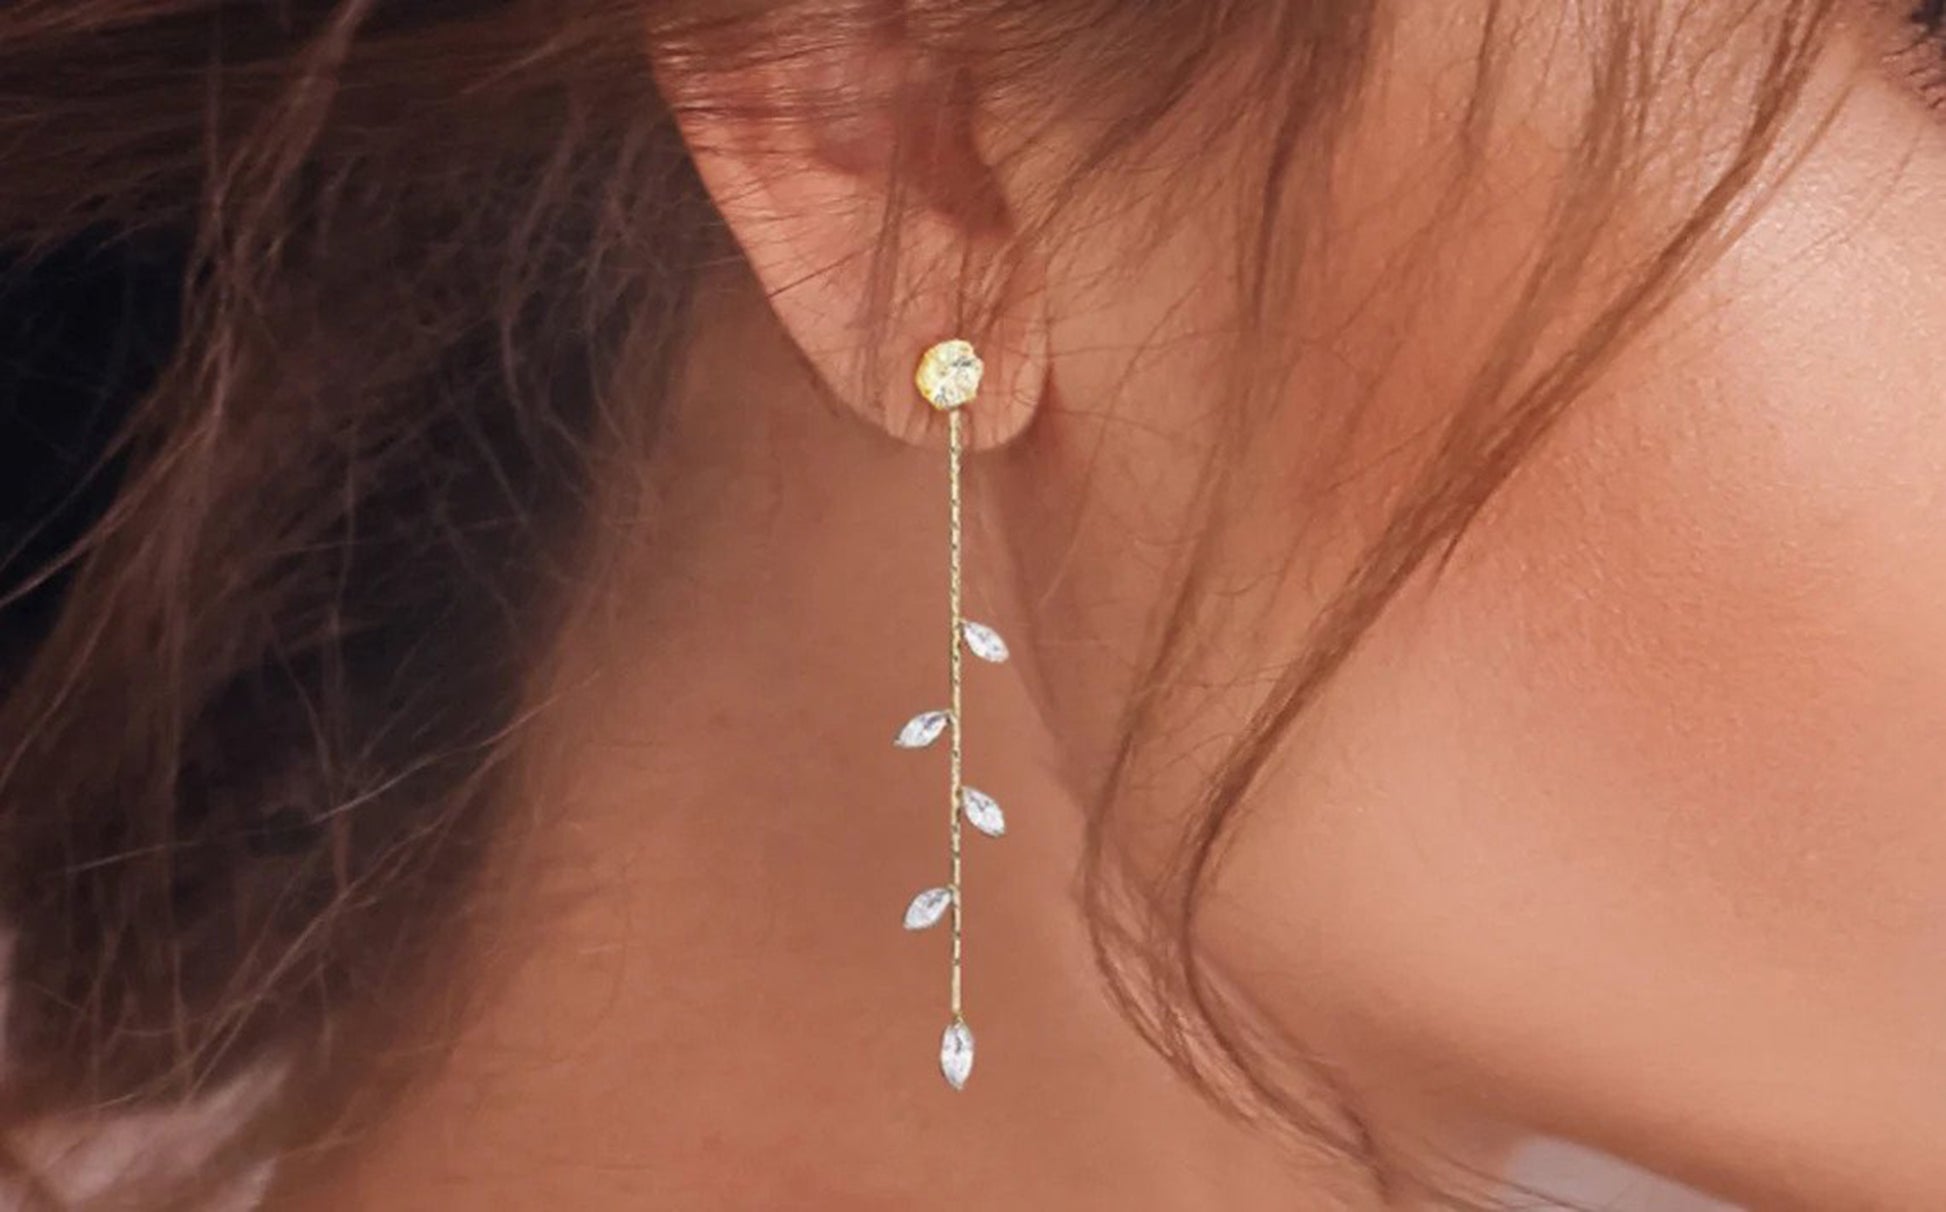 14k gold filled wedding earrings with crystals and a large diamond stud are shown on a models ear.